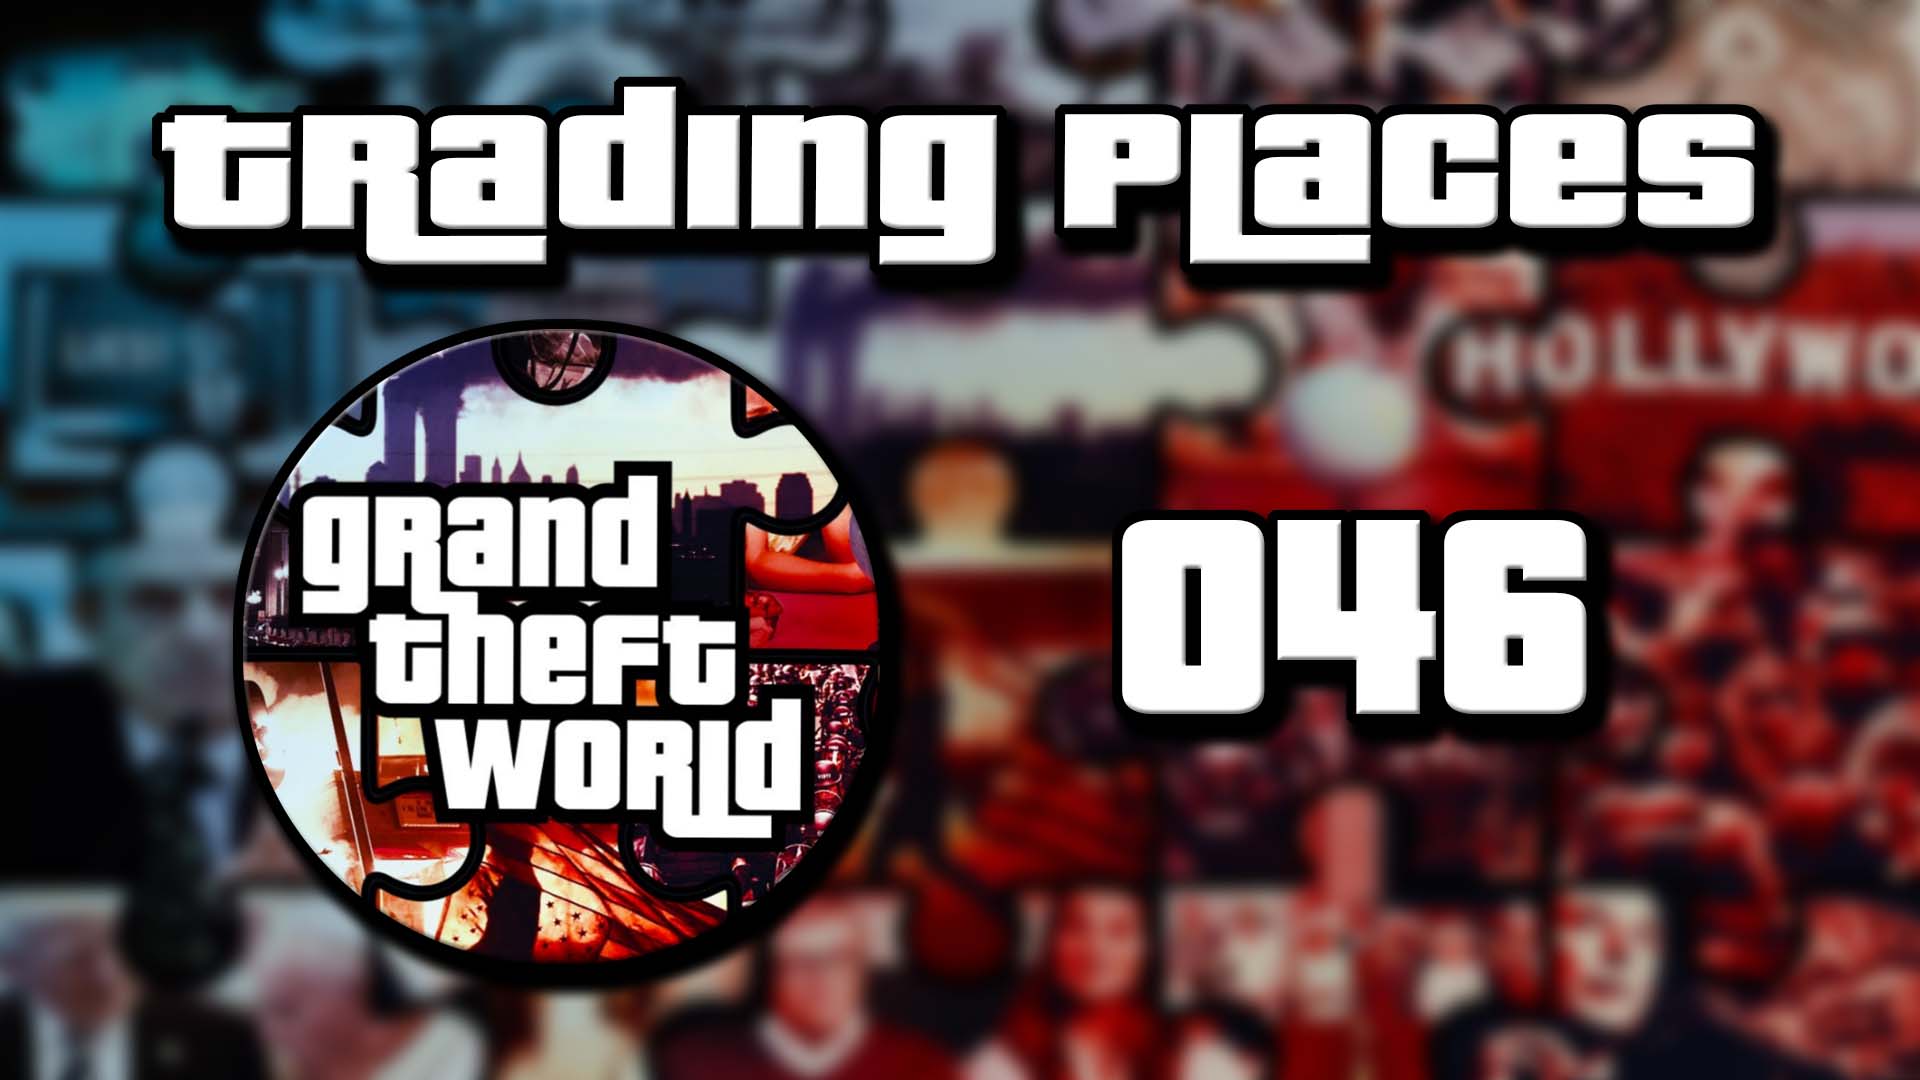 Grand Theft World Podcast 046 | Trading Places